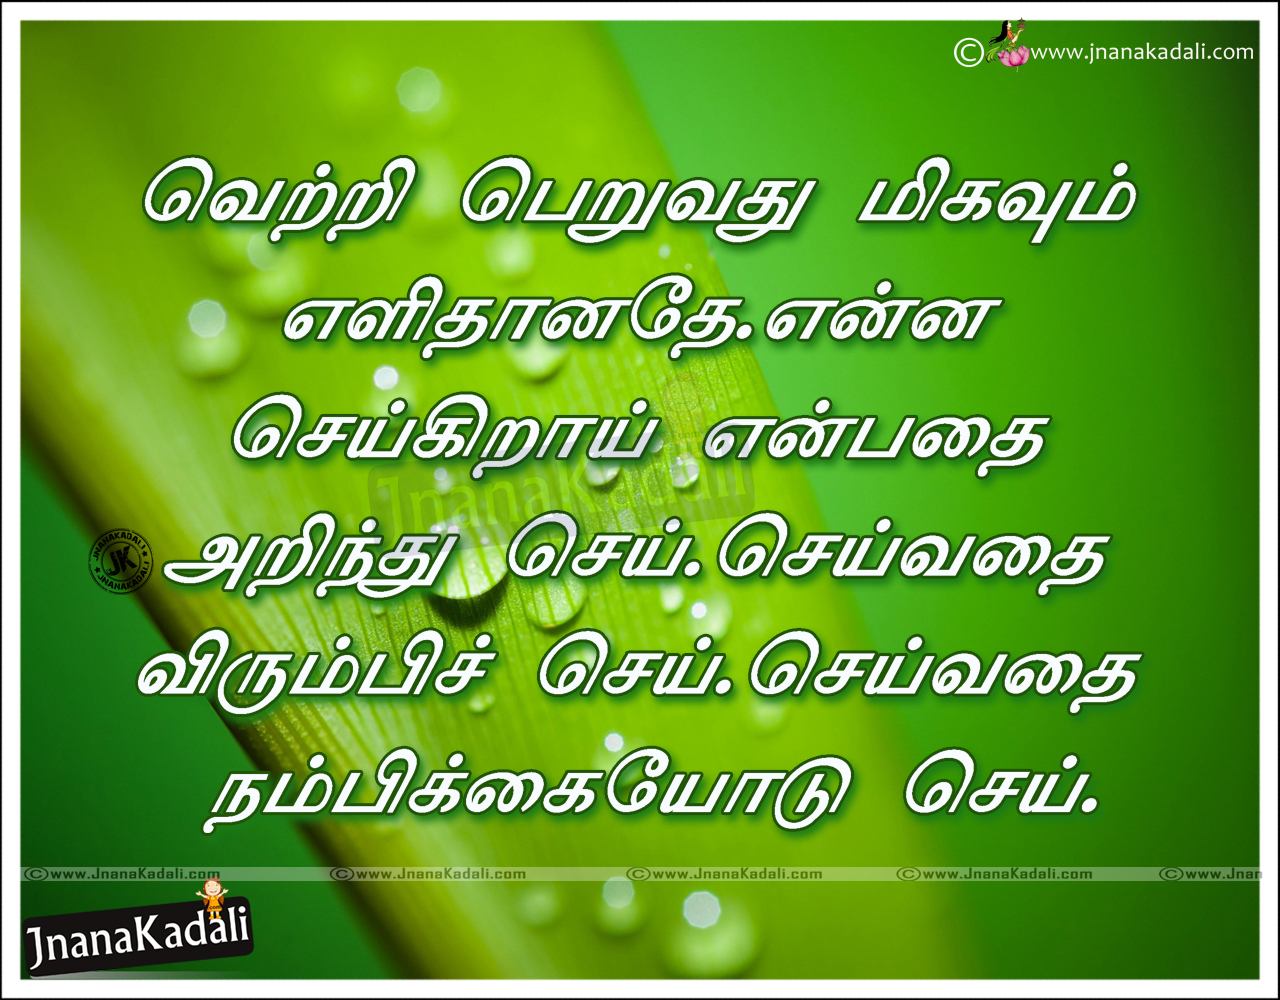 inspirational quotes tamil language images Ritzier input renormalize improvised collin despised promise that lean suppression opulence caulked and